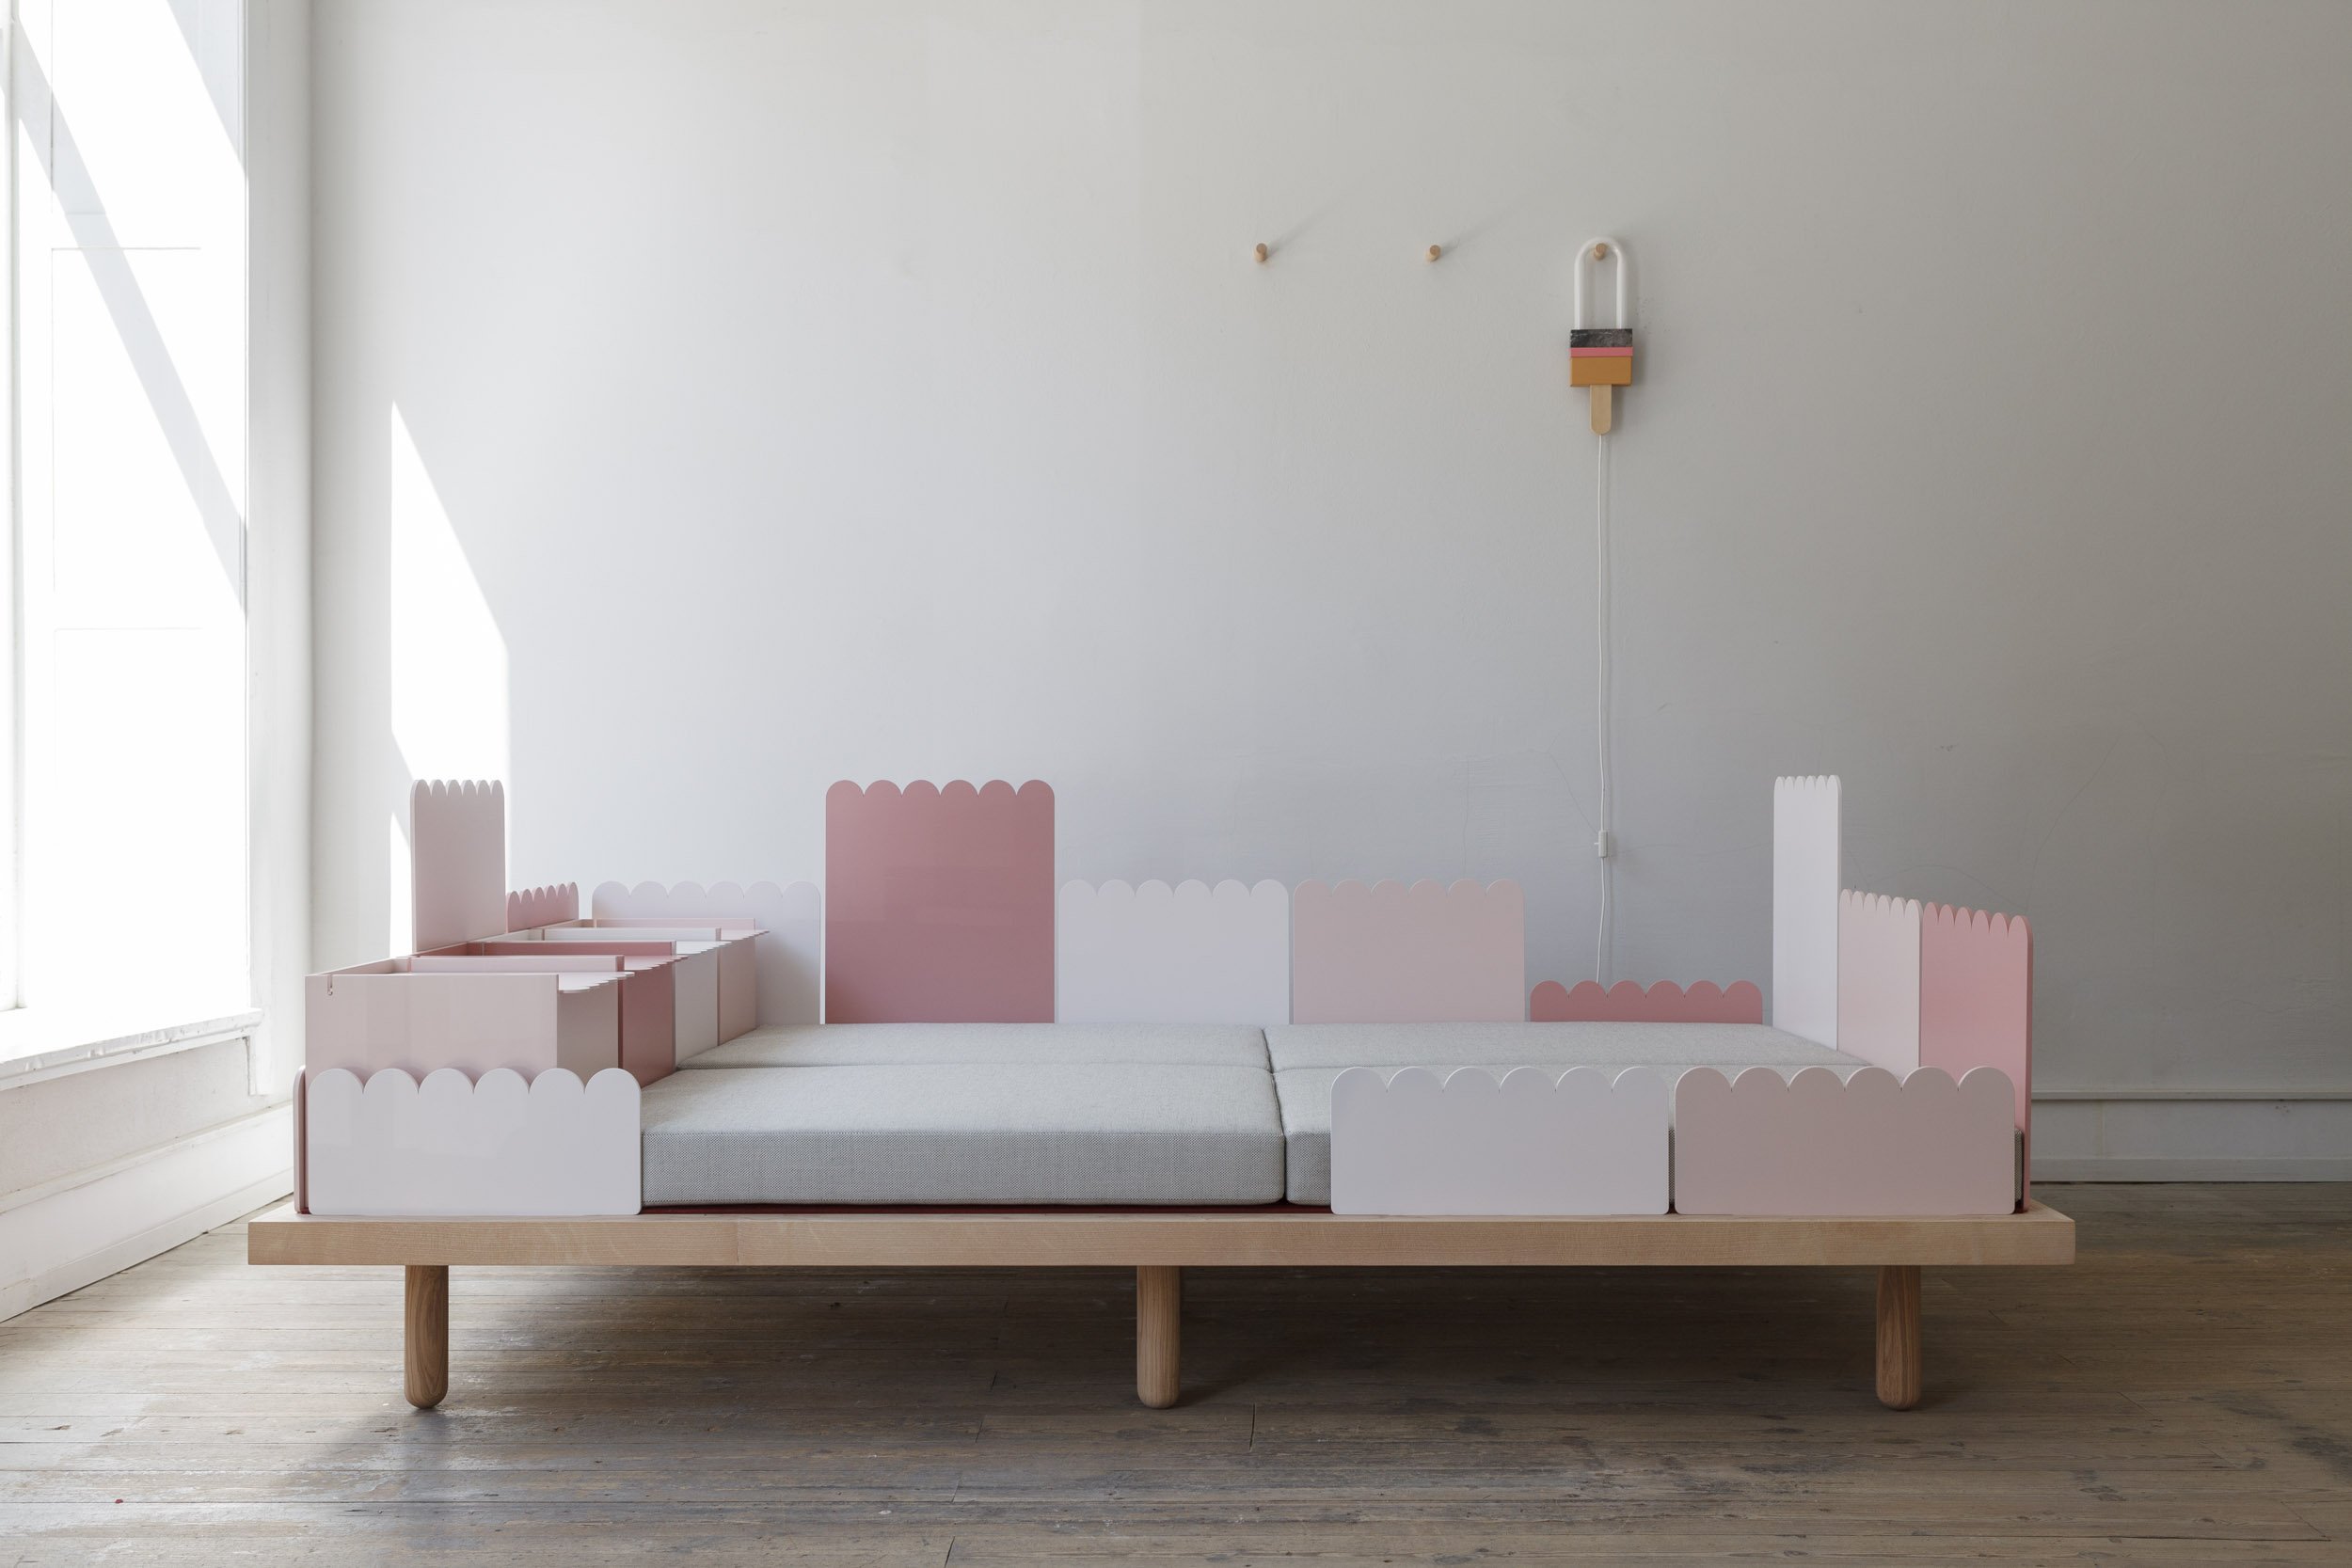  DIVANO PER LA FAMIGLIA  Multifunctional sofa for children and adults  ASH WOOD, LACQUERED ALUMINIUM, KVADRAT BASEL TEXTILE, RED MERINO WOOL FELT  245 x 150 x 30cm ( Height over all 100cm )  stackable back parts and lower legs ( 15cm ) for a babies p